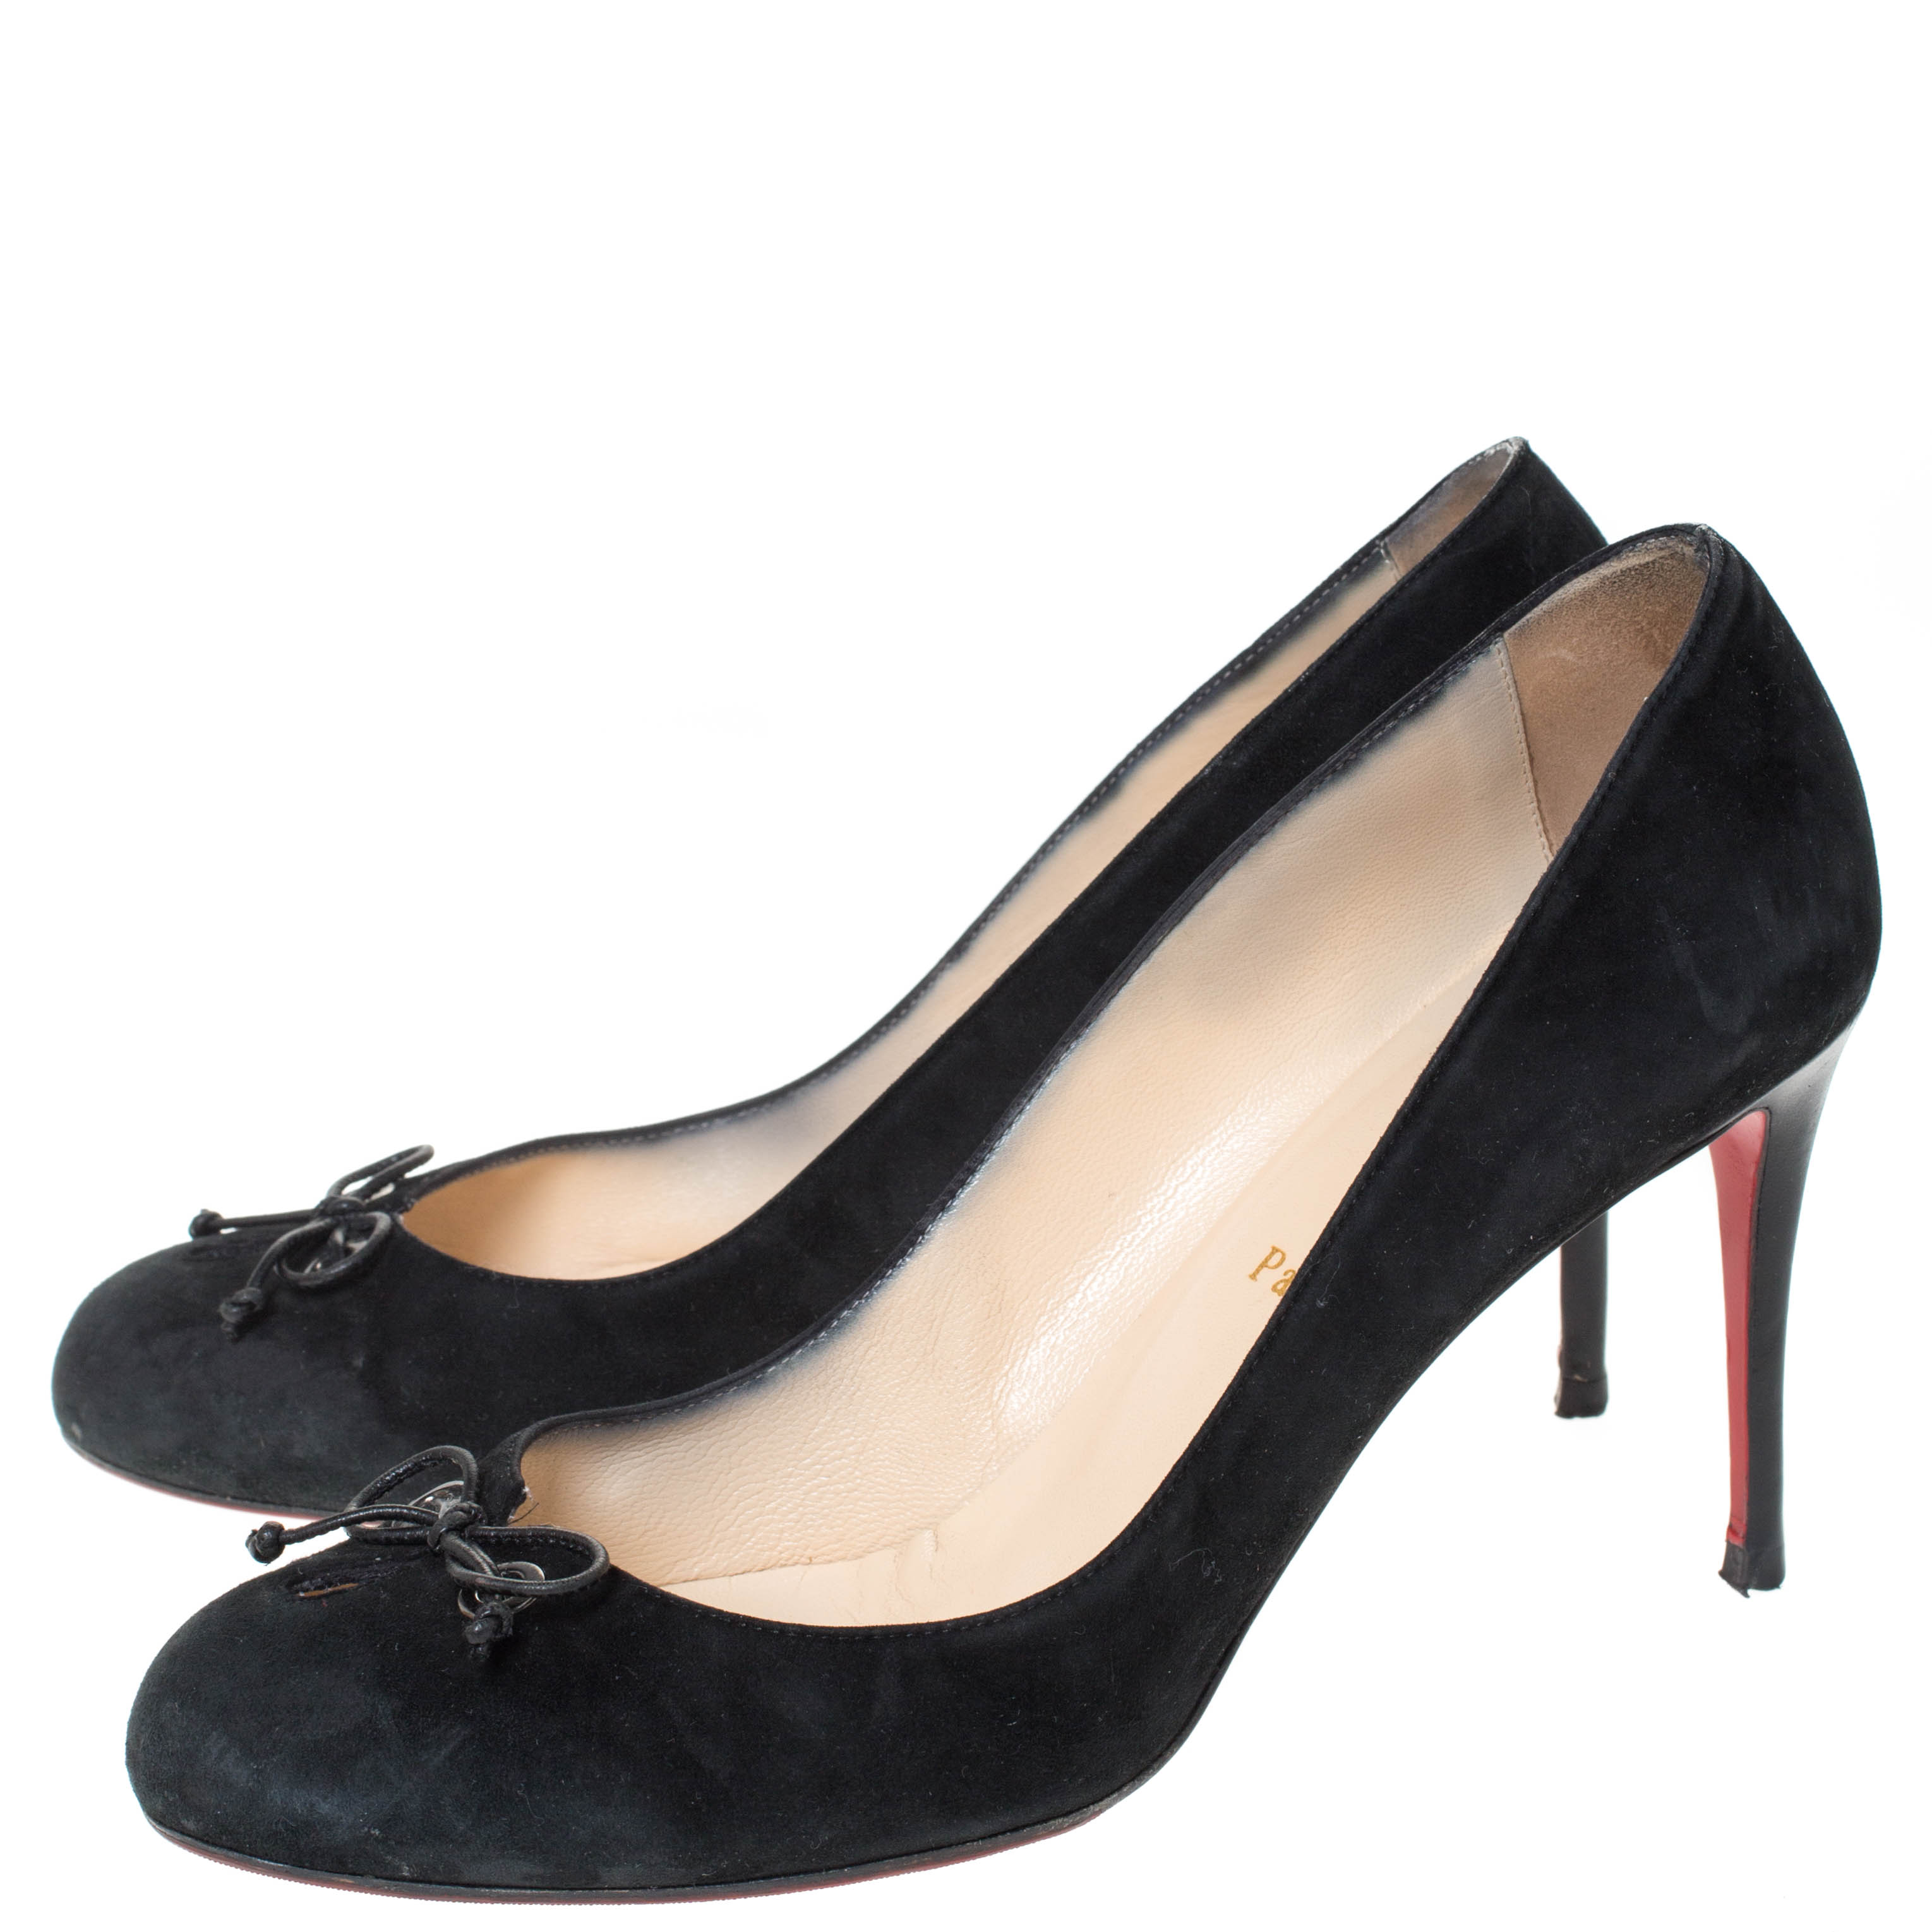 Christian Louboutin Black Suede And Leather Bow Tie Pumps Size 40